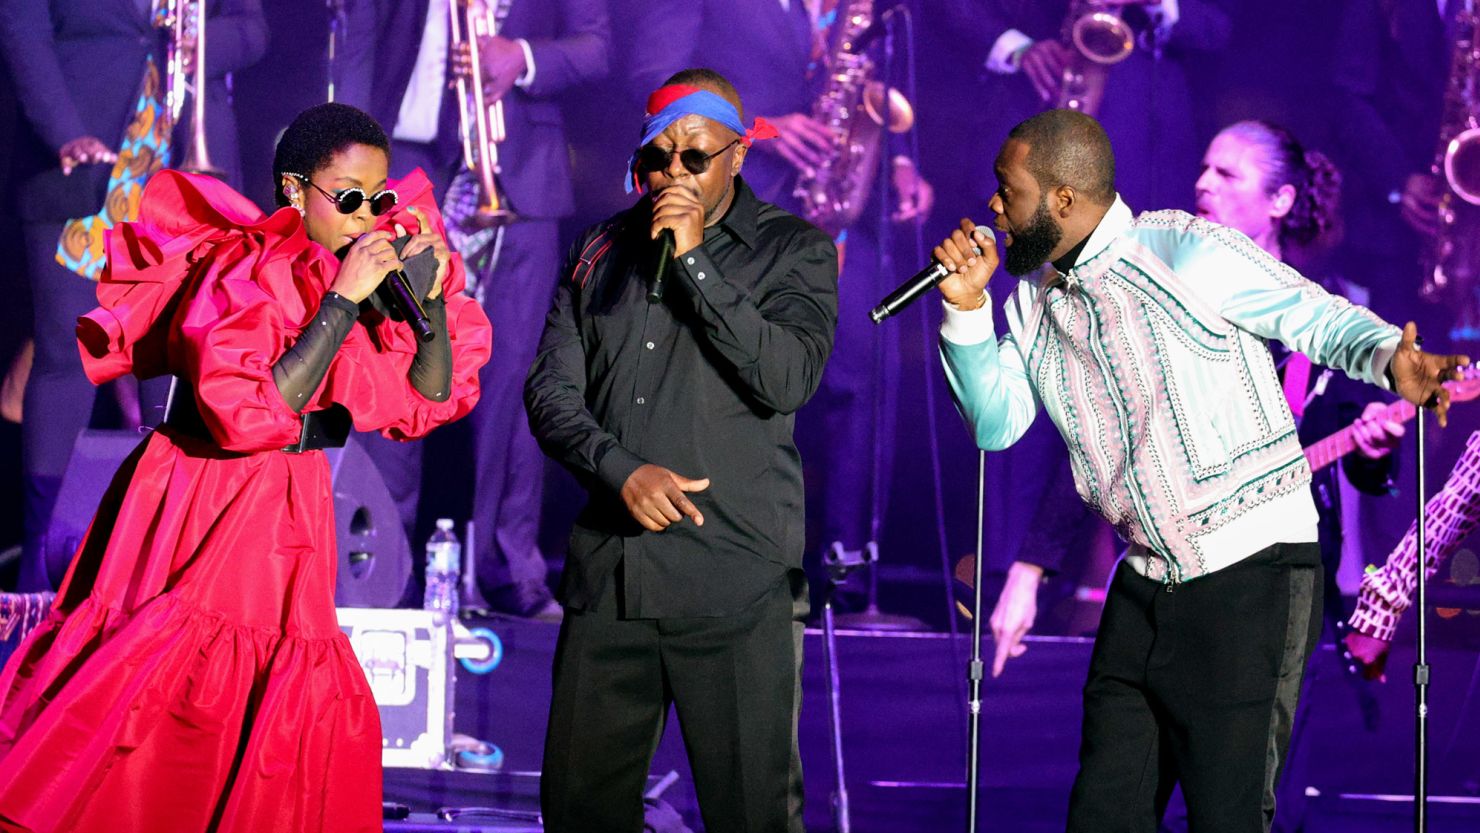 The Fugees perform at Pier 17 in NYC in support of Global Citizen Live on September 25, 2021.